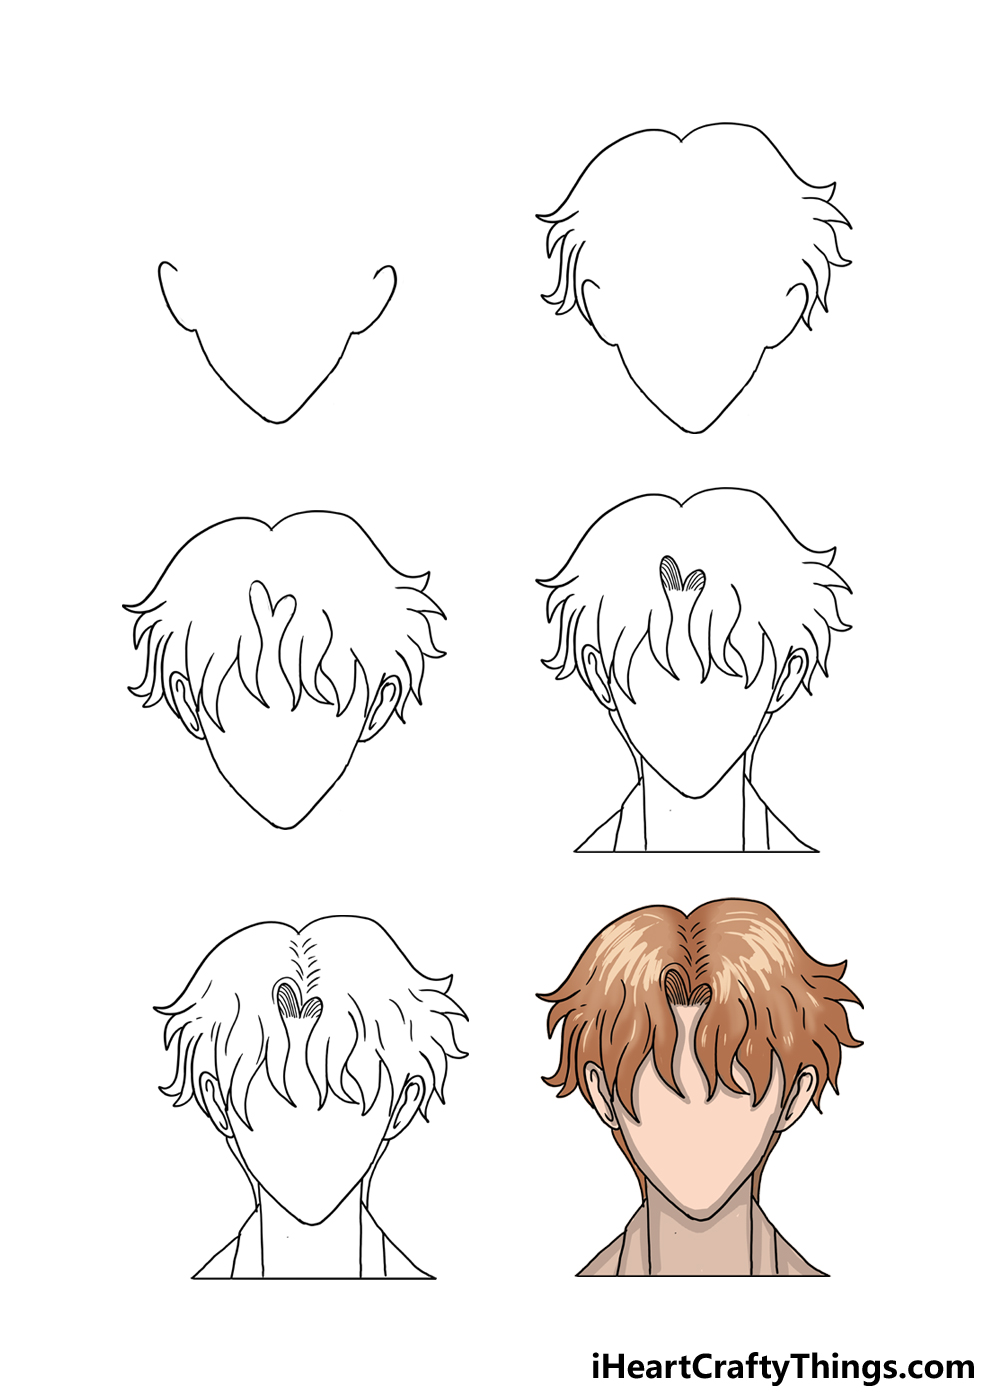 What is the meaning of the different hairstyles in anime? - Quora